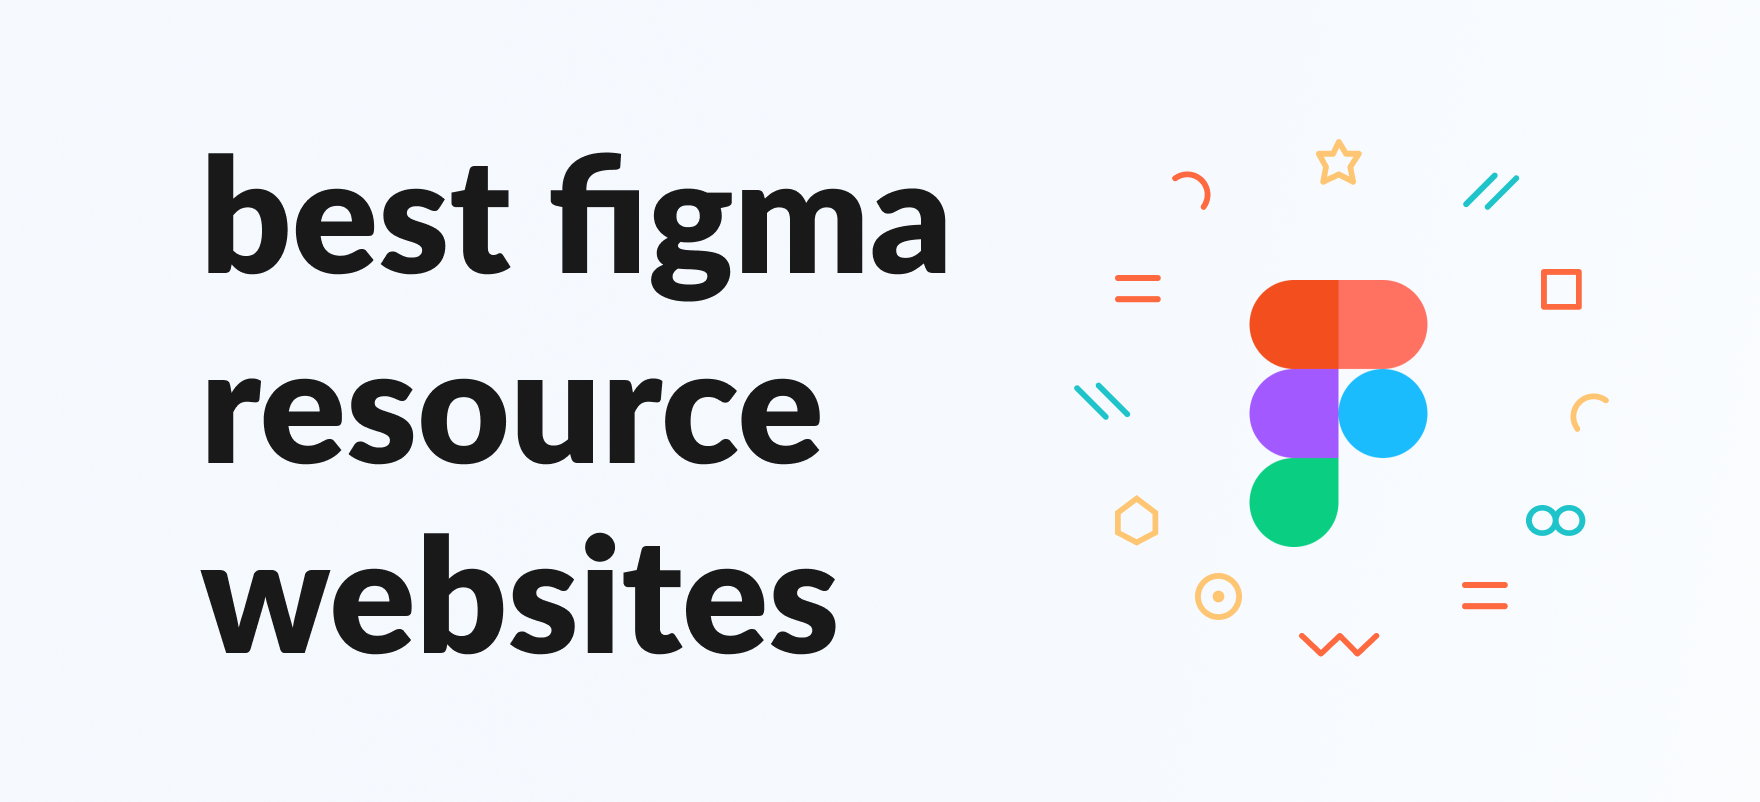 best figma tool resources and ui kits